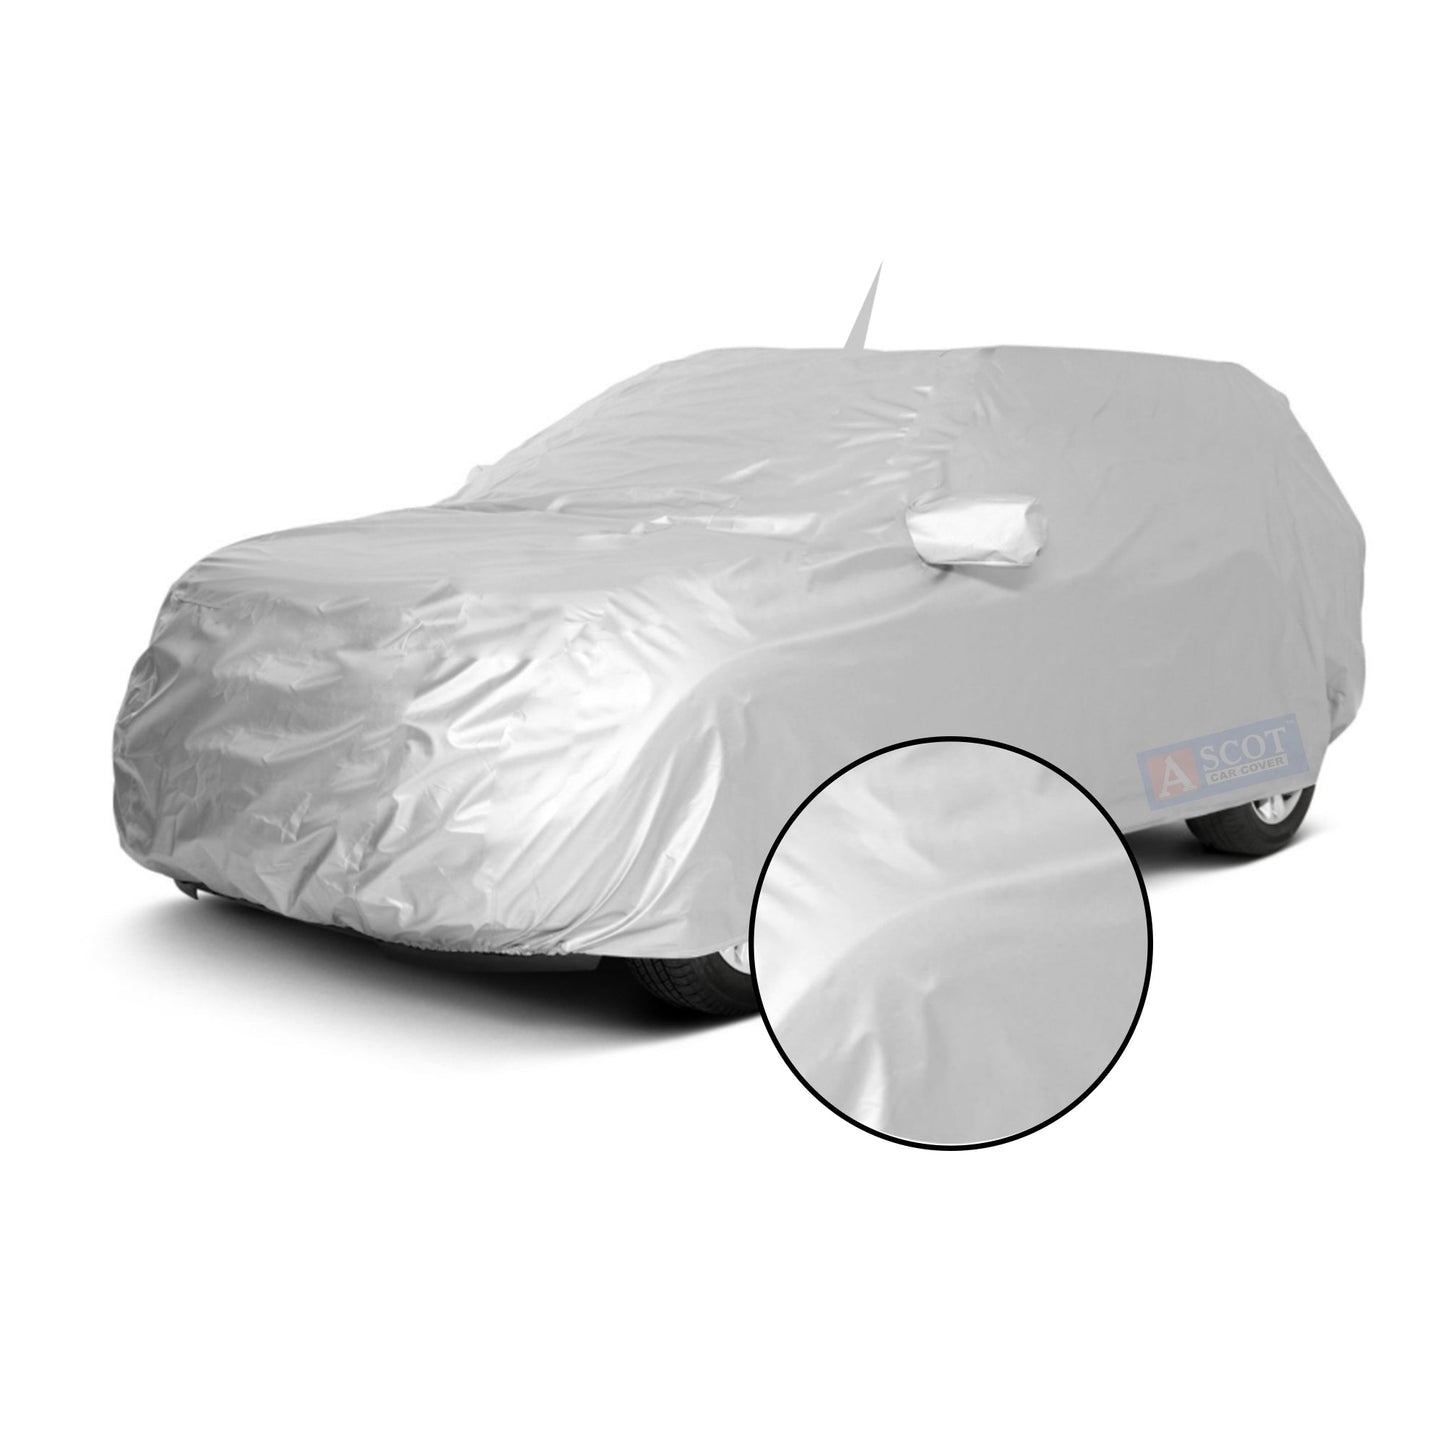 Ascot Honda City 5th Generation 2019-2024 Model Car Body Cover Dust Proof, Trippel Stitched